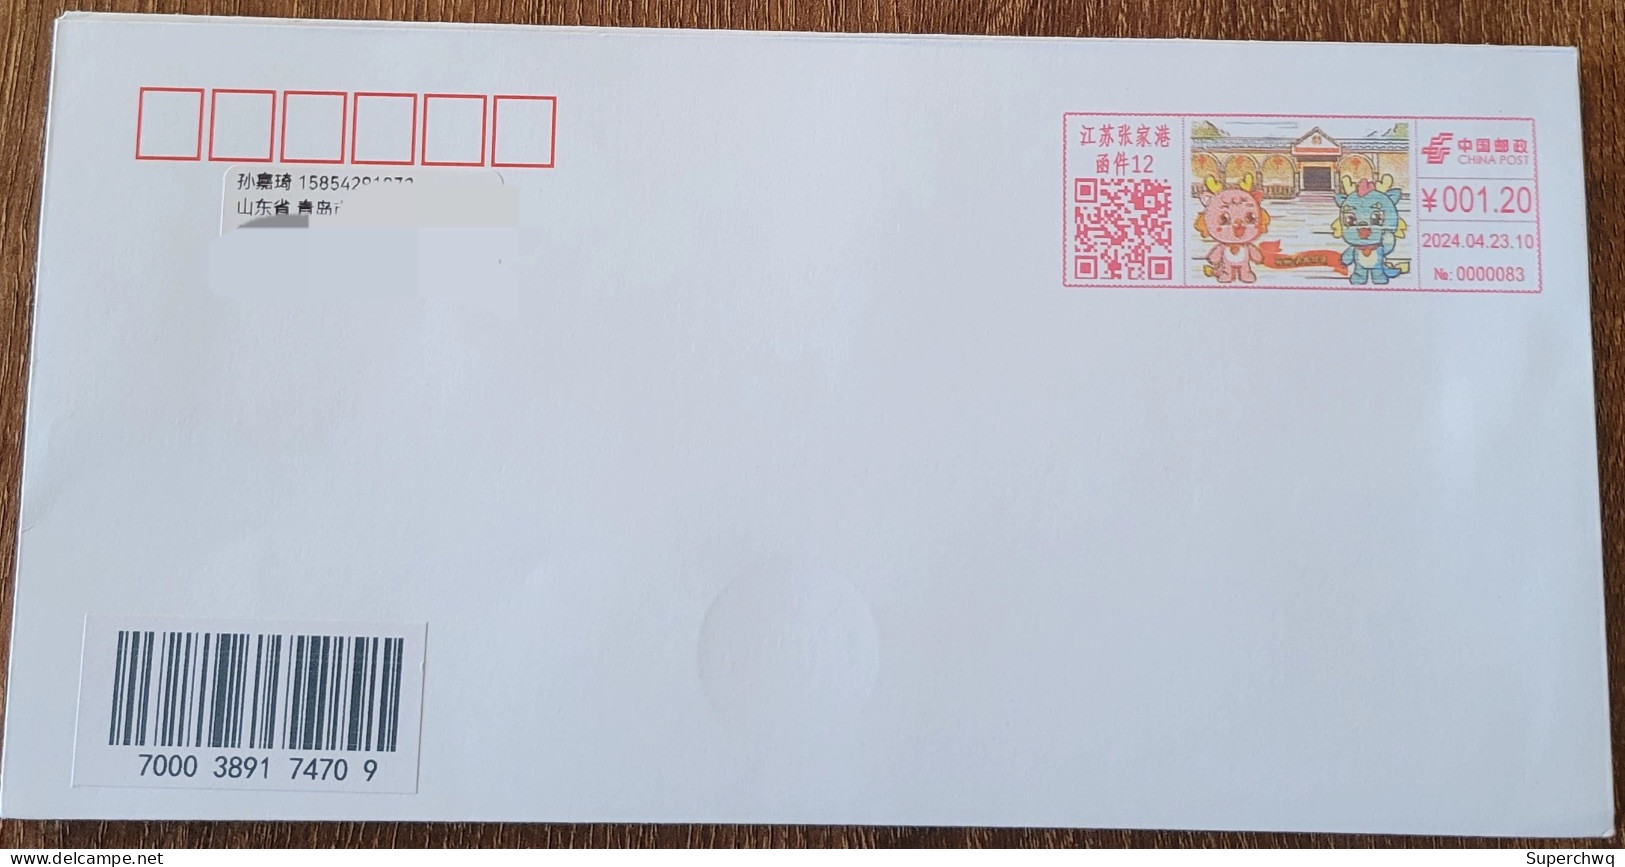 China Cover "Qinglong Community" (Zhangjiagang, Jiangsu) Colored Postage Machine Stamp First Day Actual Delivery Seal - Sobres